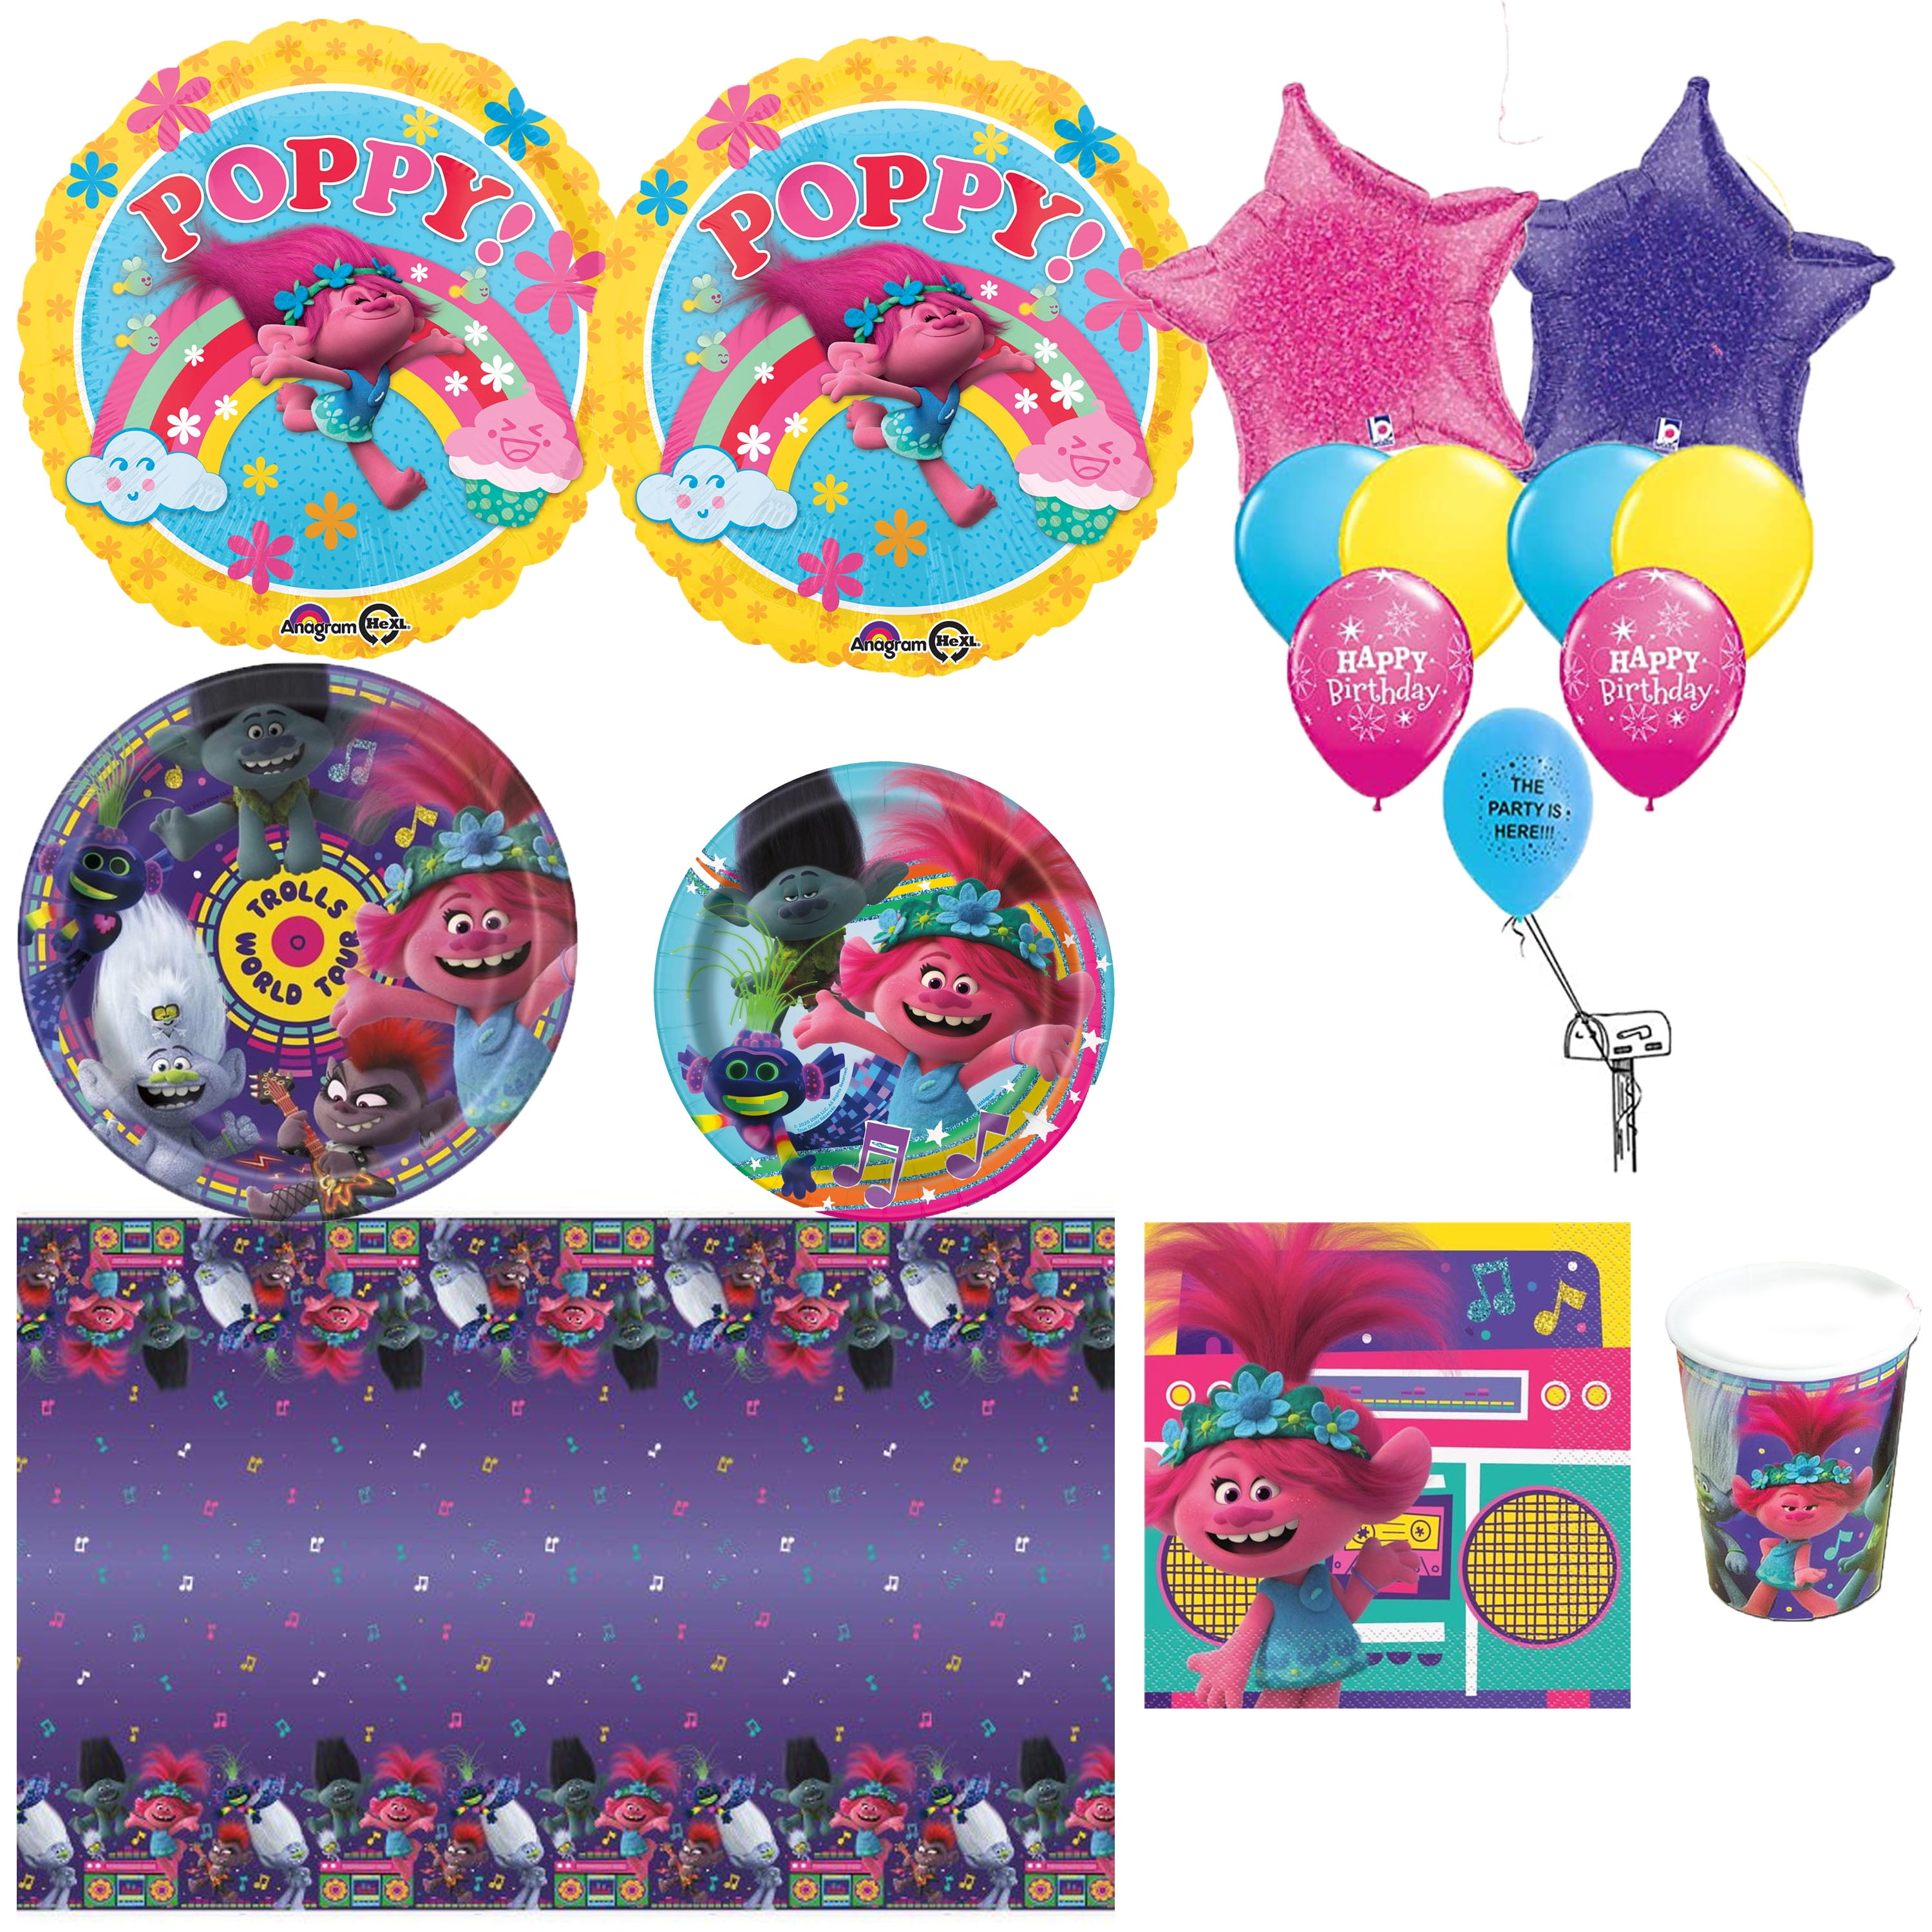 Trolls Poppy 2nd Birthday Party Supplies 16 Guest Kit and Balloon 